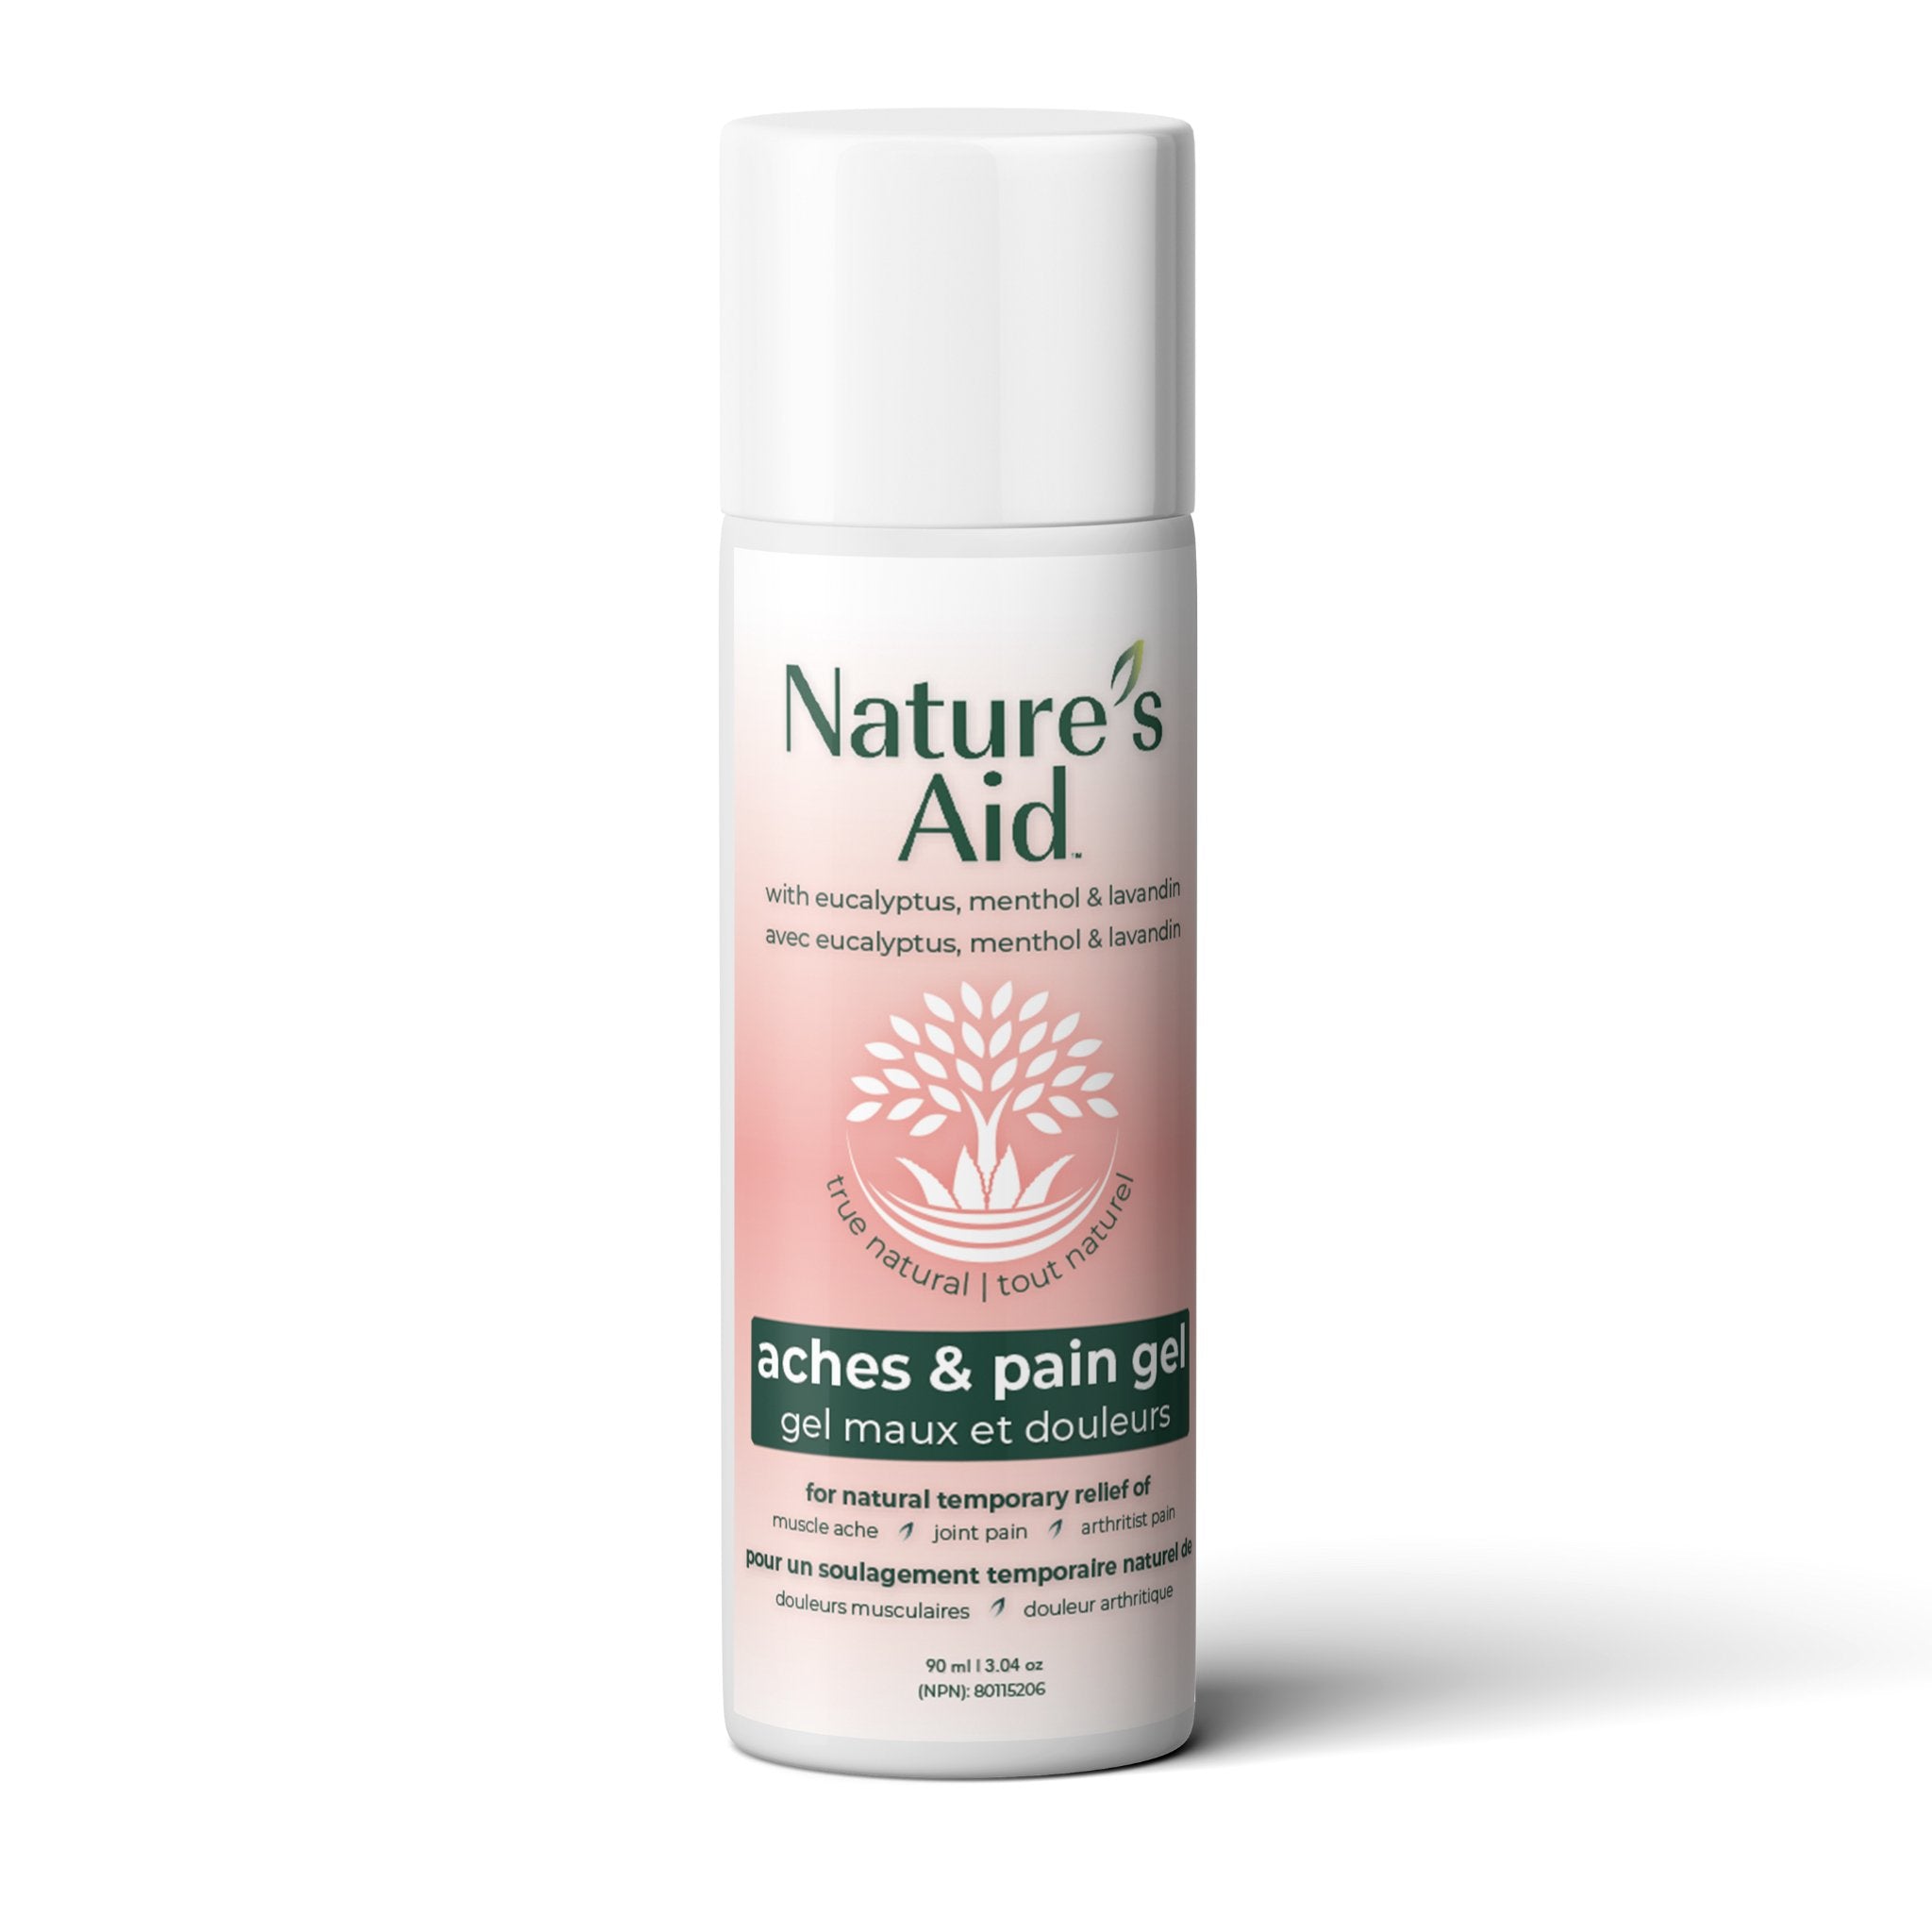 Skin Gel | Aches and Pain - Nature's Aid, Orderform, Skingel